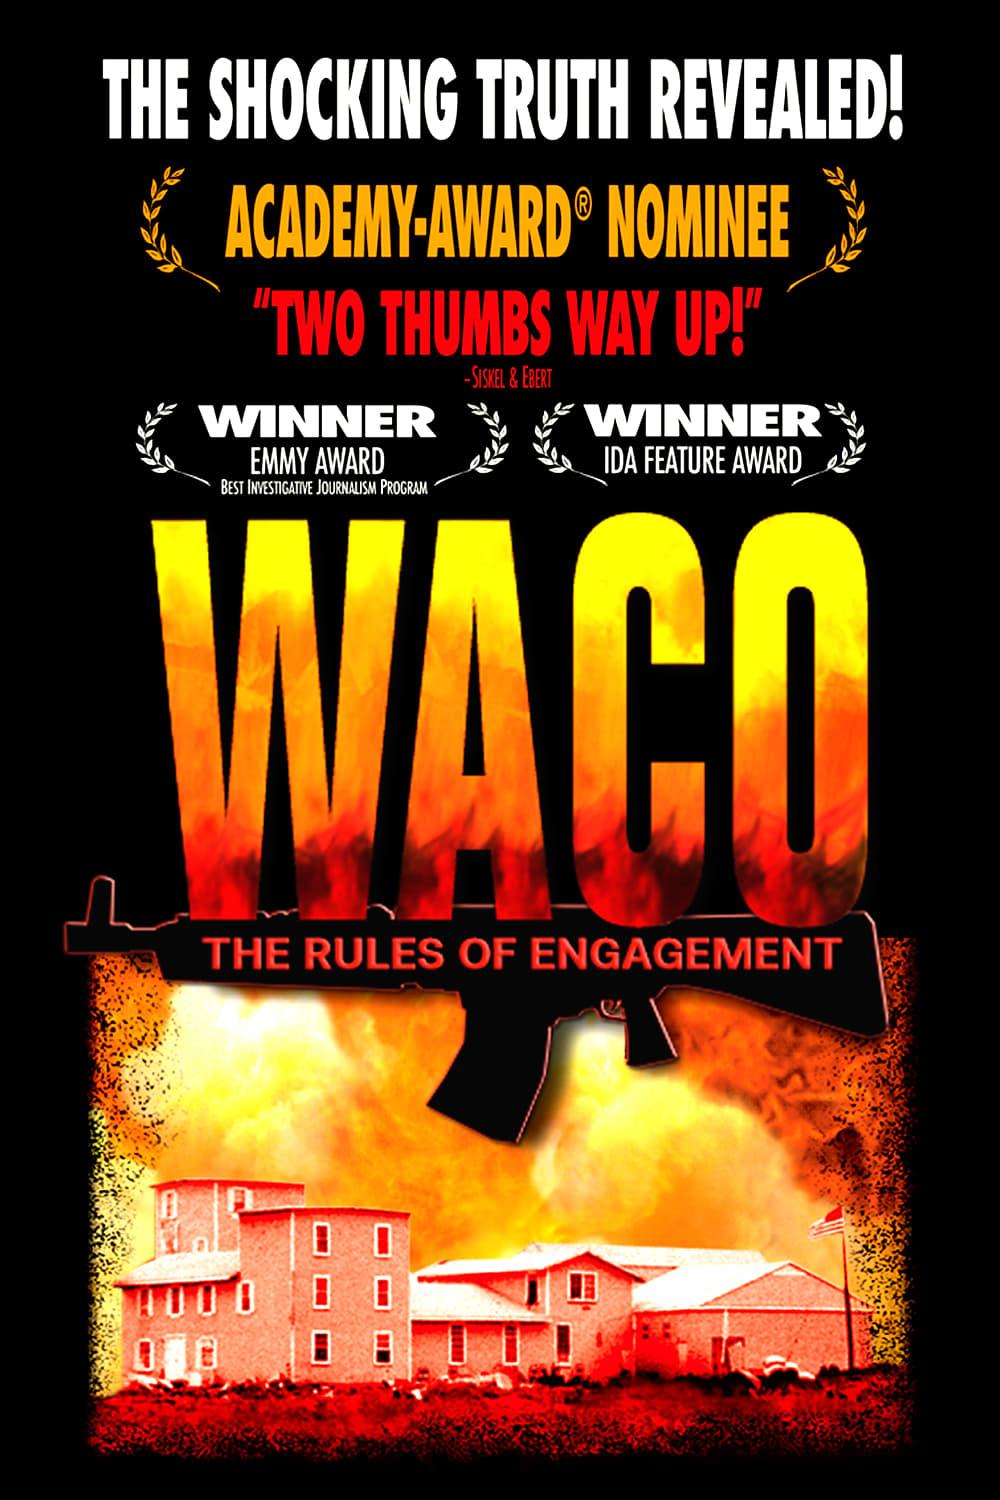 Waco: The Rules of Engagement poster